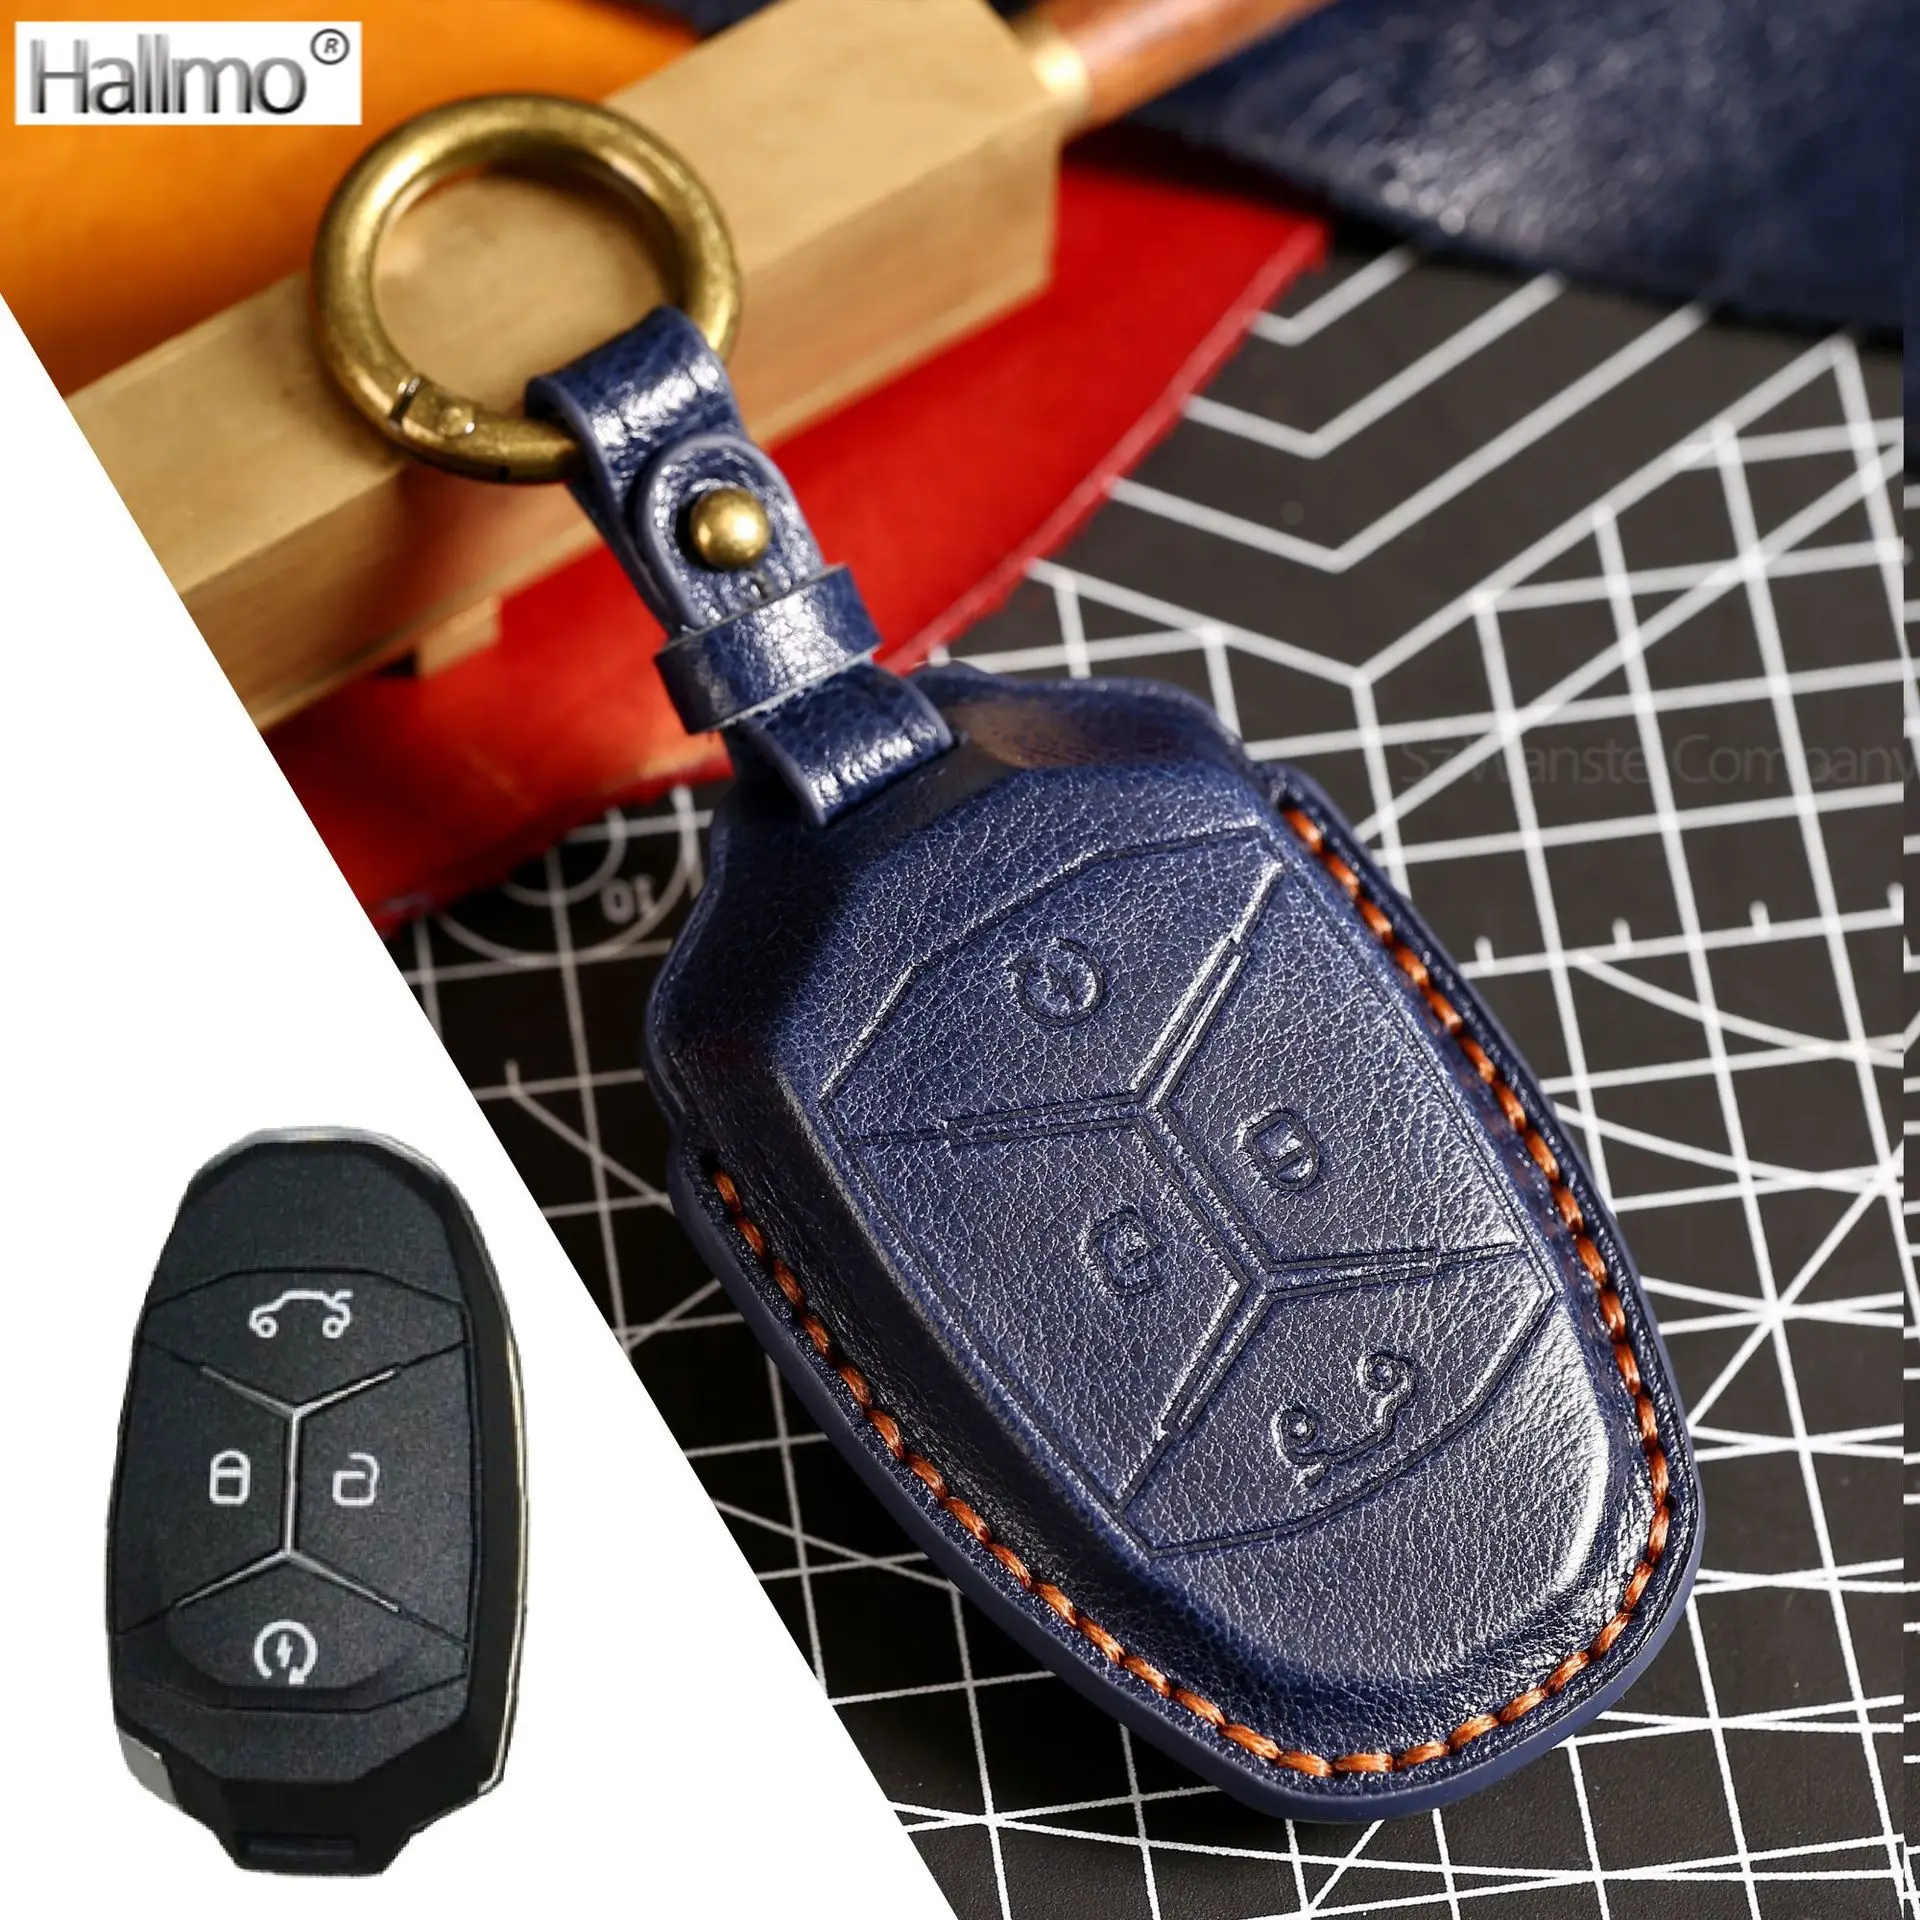 Hallmo Leather Car Key Case Shell for LYNK&CO 01 PHEV 02 03 05 2017 2018 Auto Smart Remote Key Protector Cover Bag Accessories